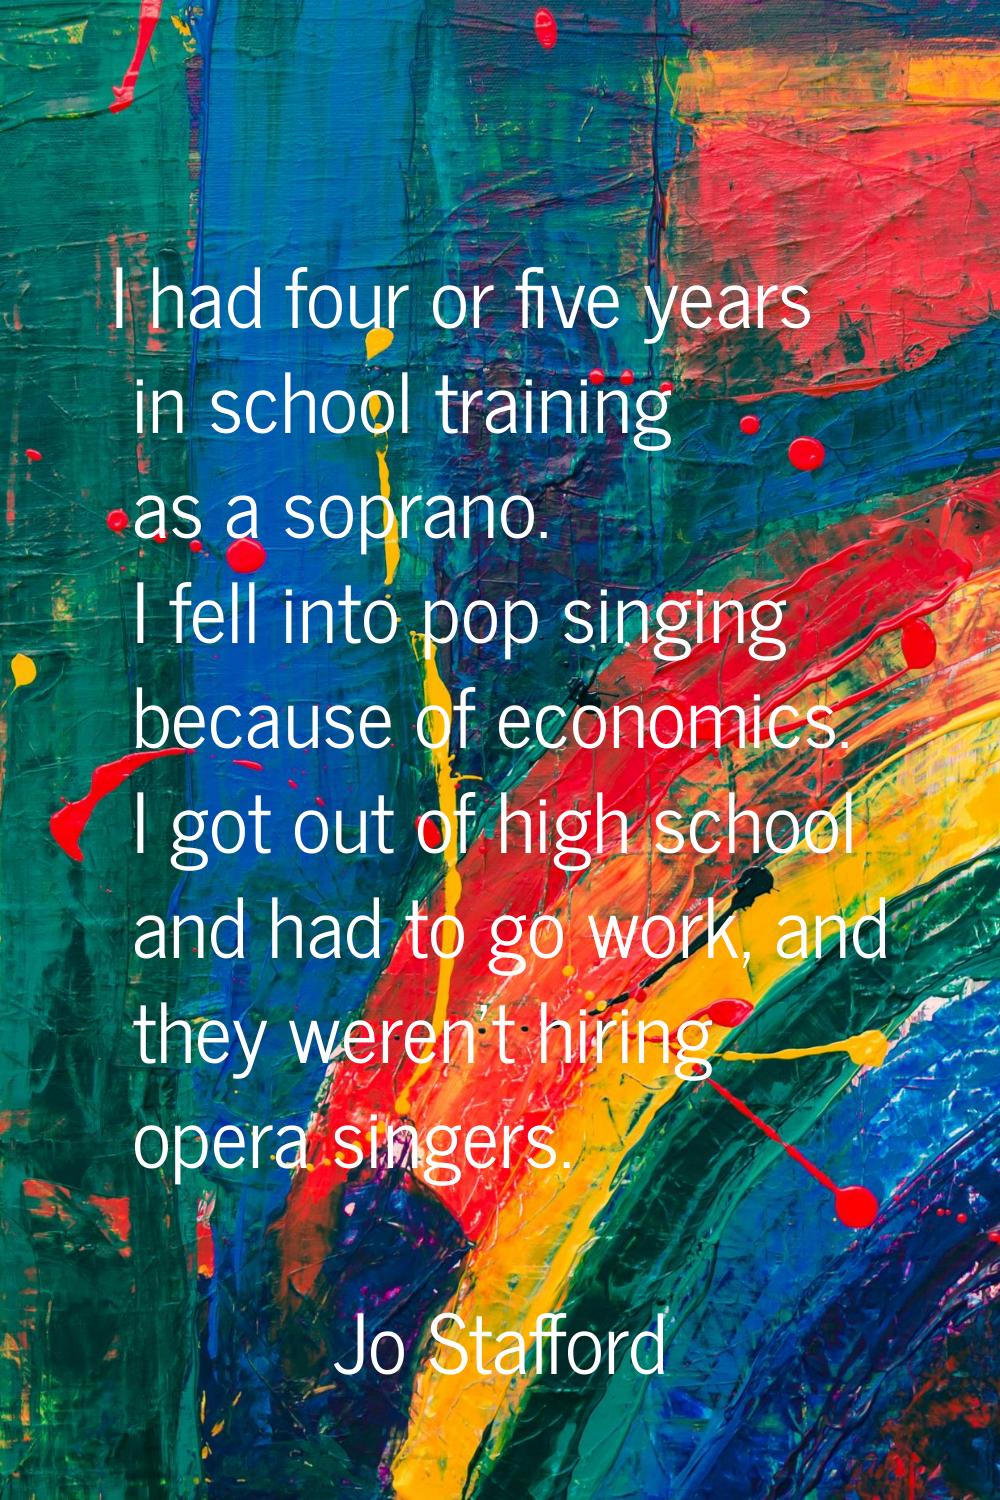 I had four or five years in school training as a soprano. I fell into pop singing because of econom